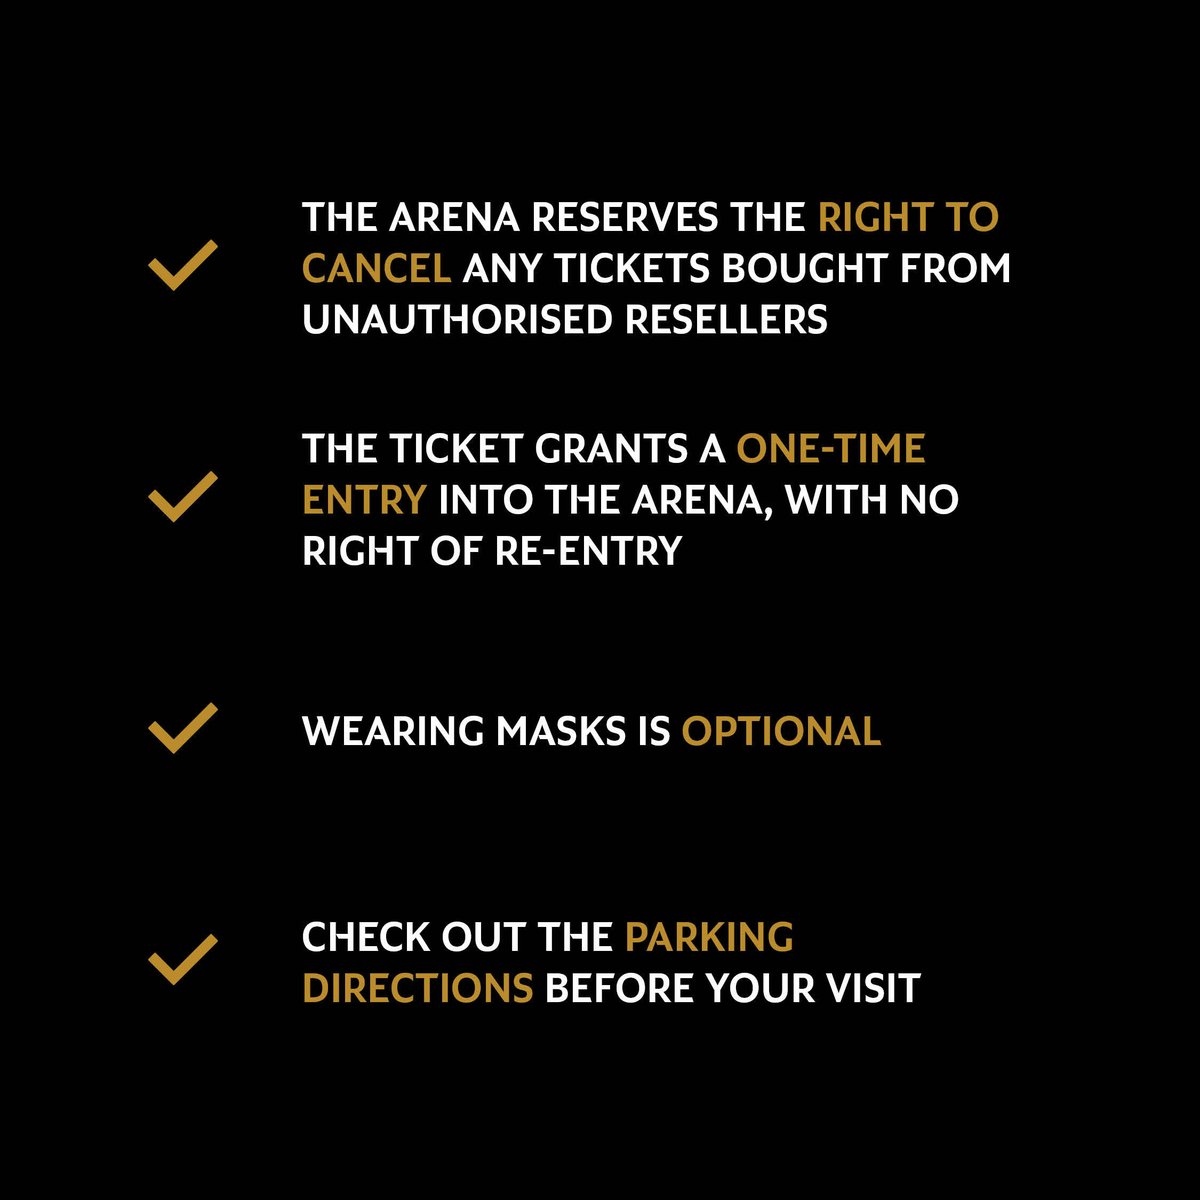 Get rock n’ roll ready - check out these entry reminders ahead of your visit to the Arena for the 1st of June.

@gunsnroses @yasisland @yasbayuae @livenationme @inabudhabi

#EtihadArena #RediscoverEntertainment #RediscoverAD #ExperienceExtraordinary #InAbuDhabi